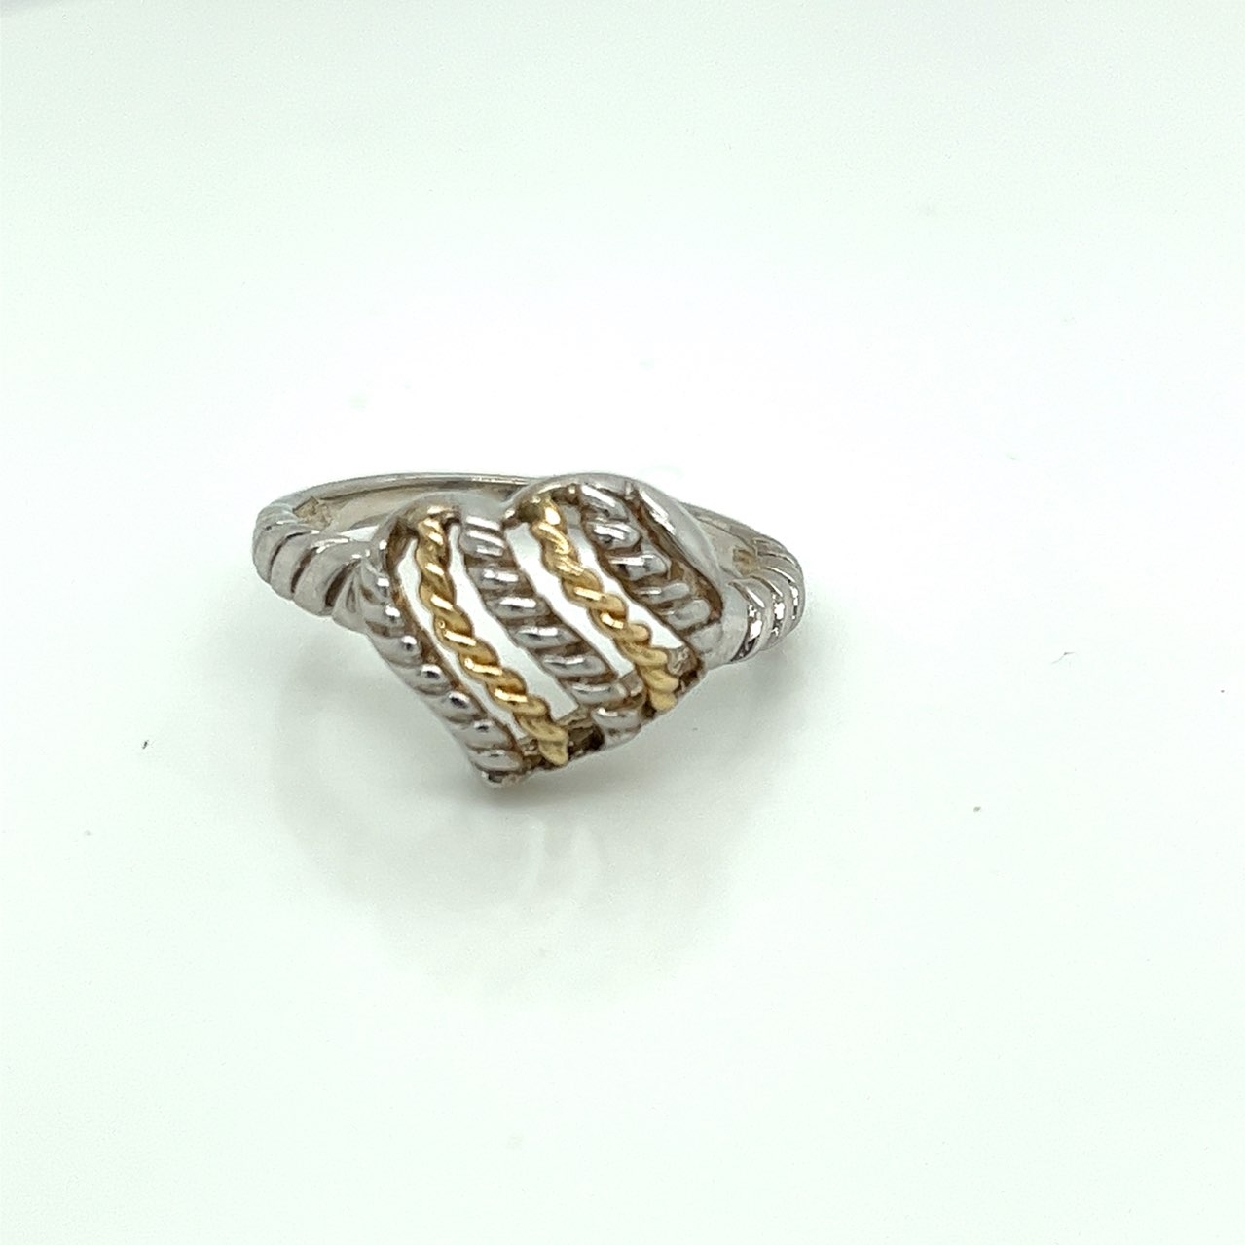 Sterling Silver Heart Shaped Ring with Gold Rope Detail

Size 7.25